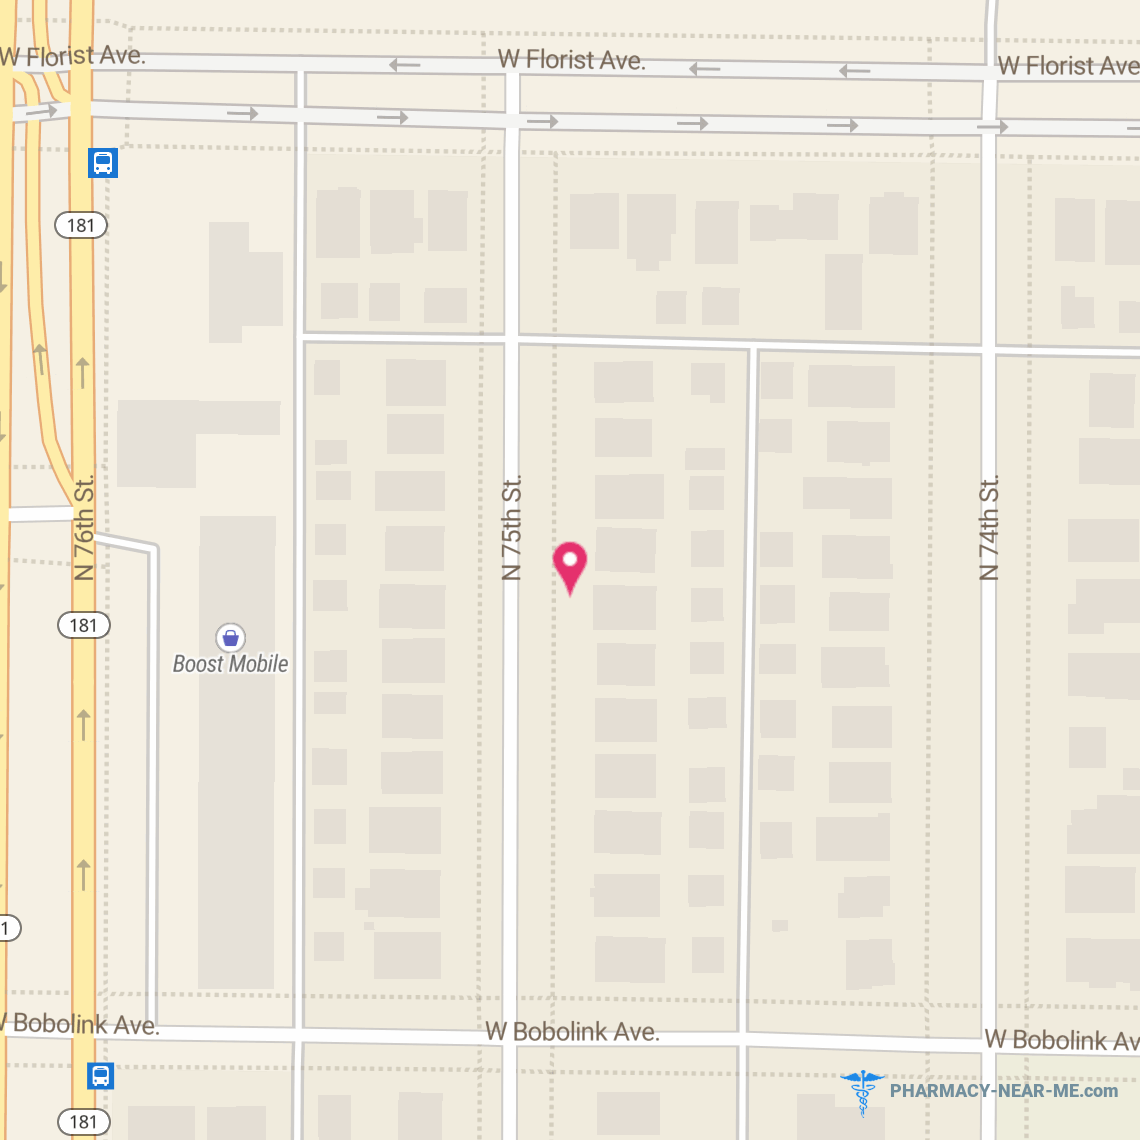 CVS PHARMACY - Pharmacy Hours, Phone, Reviews & Information: N 75th St, Milwaukee, Wisconsin 53210, United States